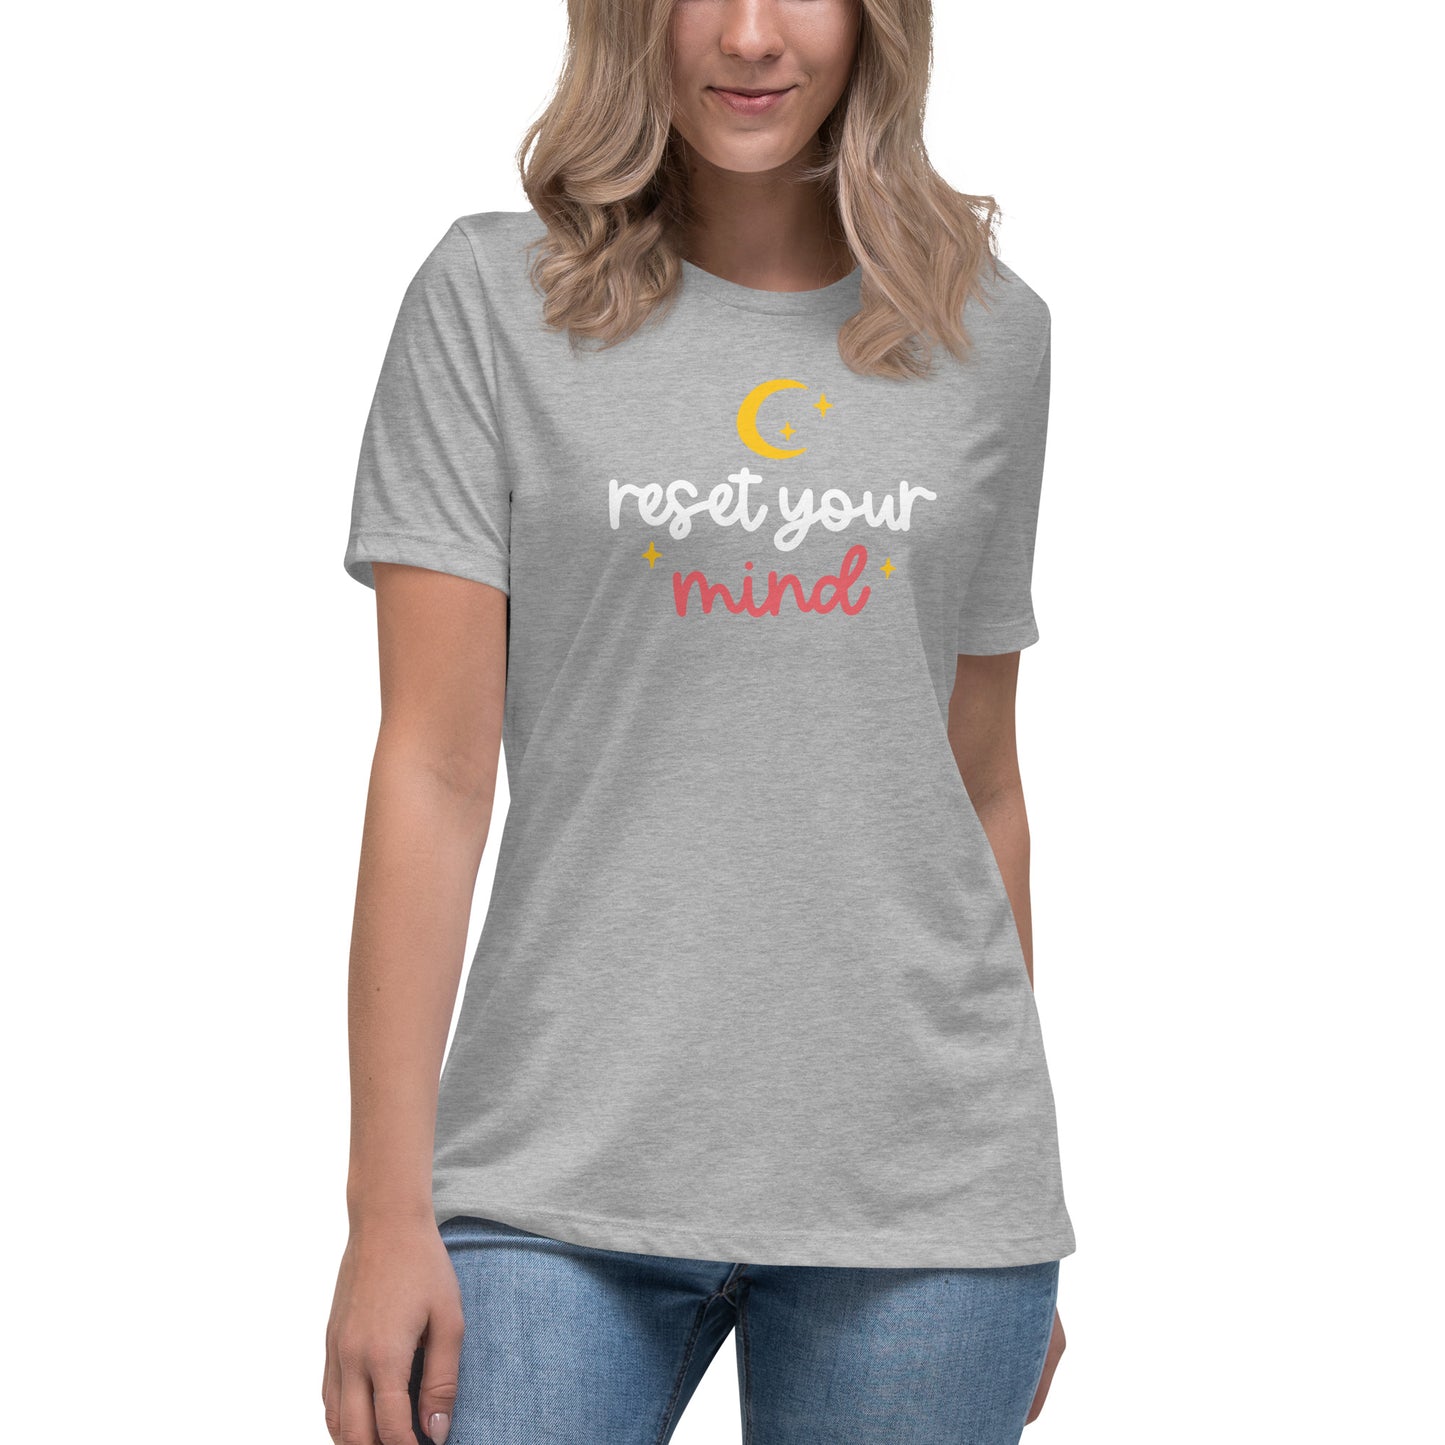 Reset Your Mind - Funny T-shirt Slogans Yoga Lover T-Shirt Collection